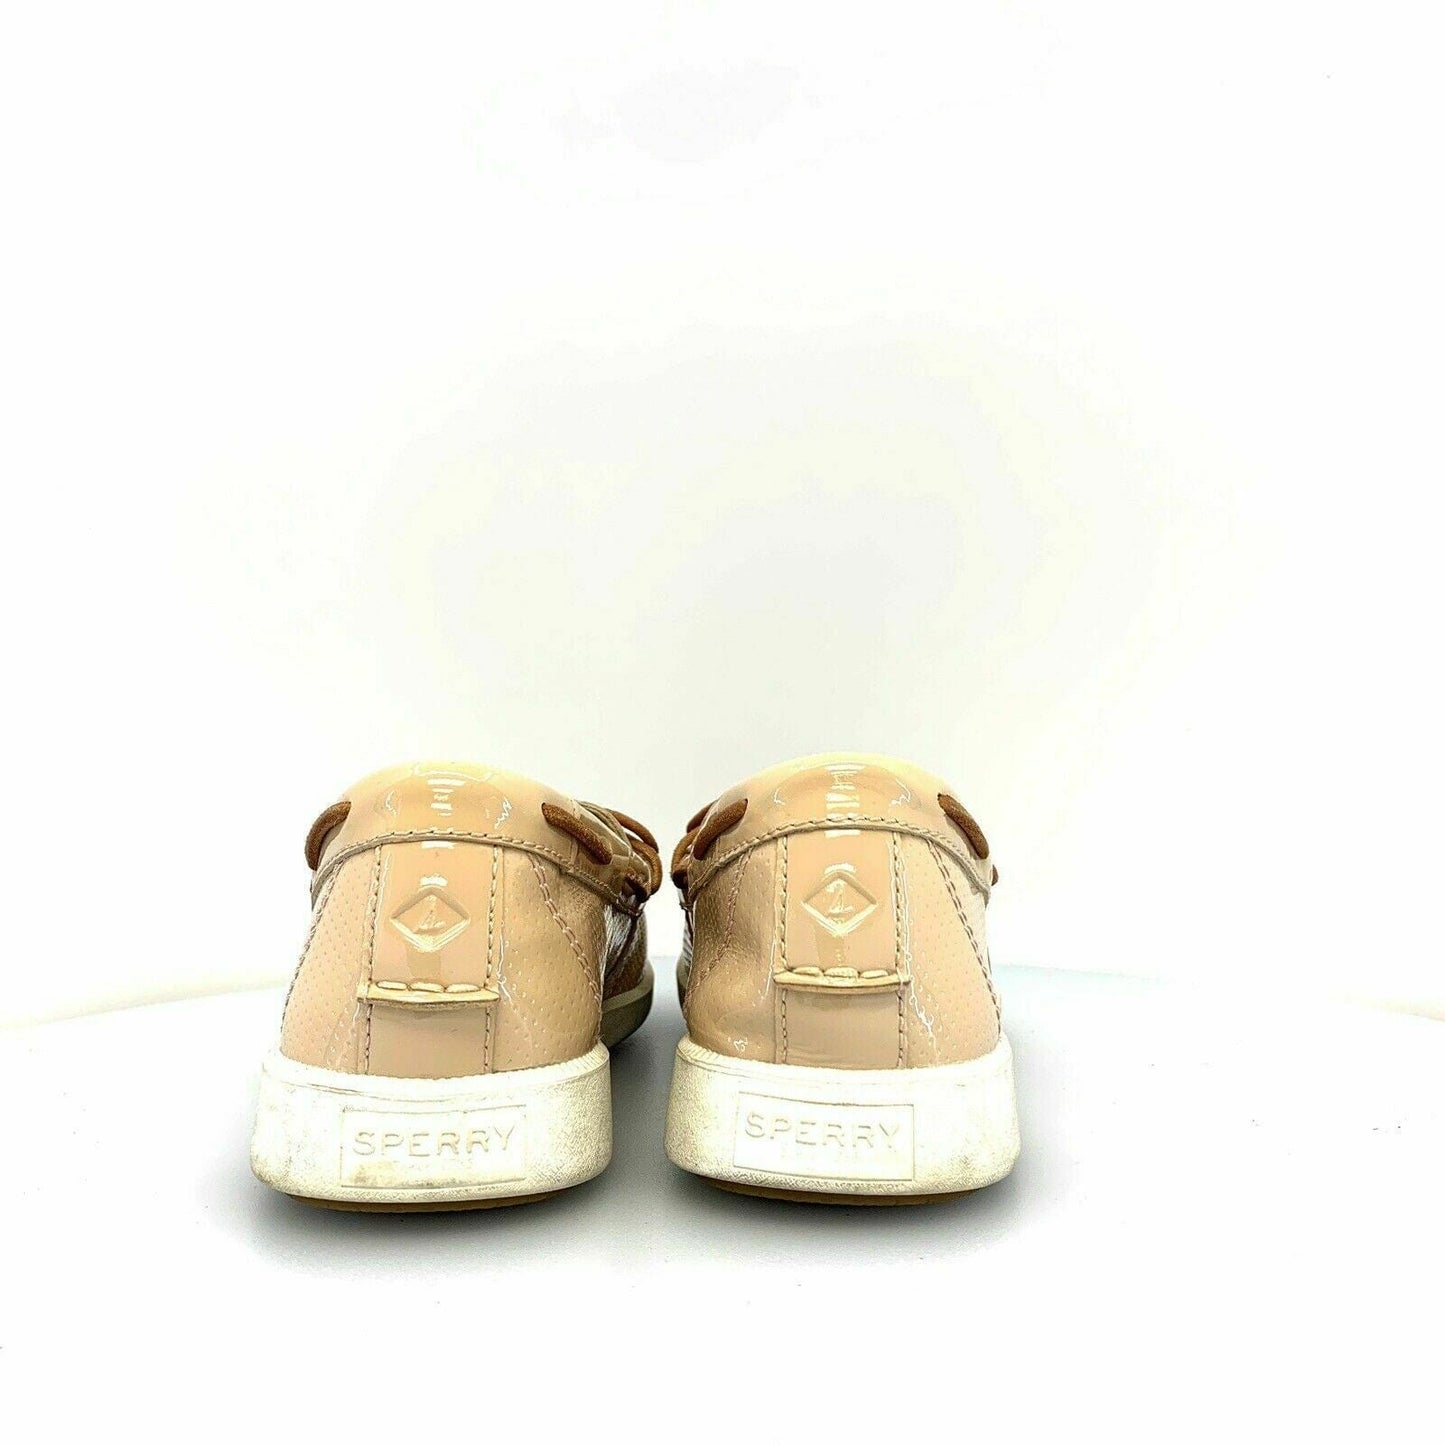 SPERRY Top-Sider Womens Size 9.5M Beige Cream Boat Shoes Textured Patent Leather